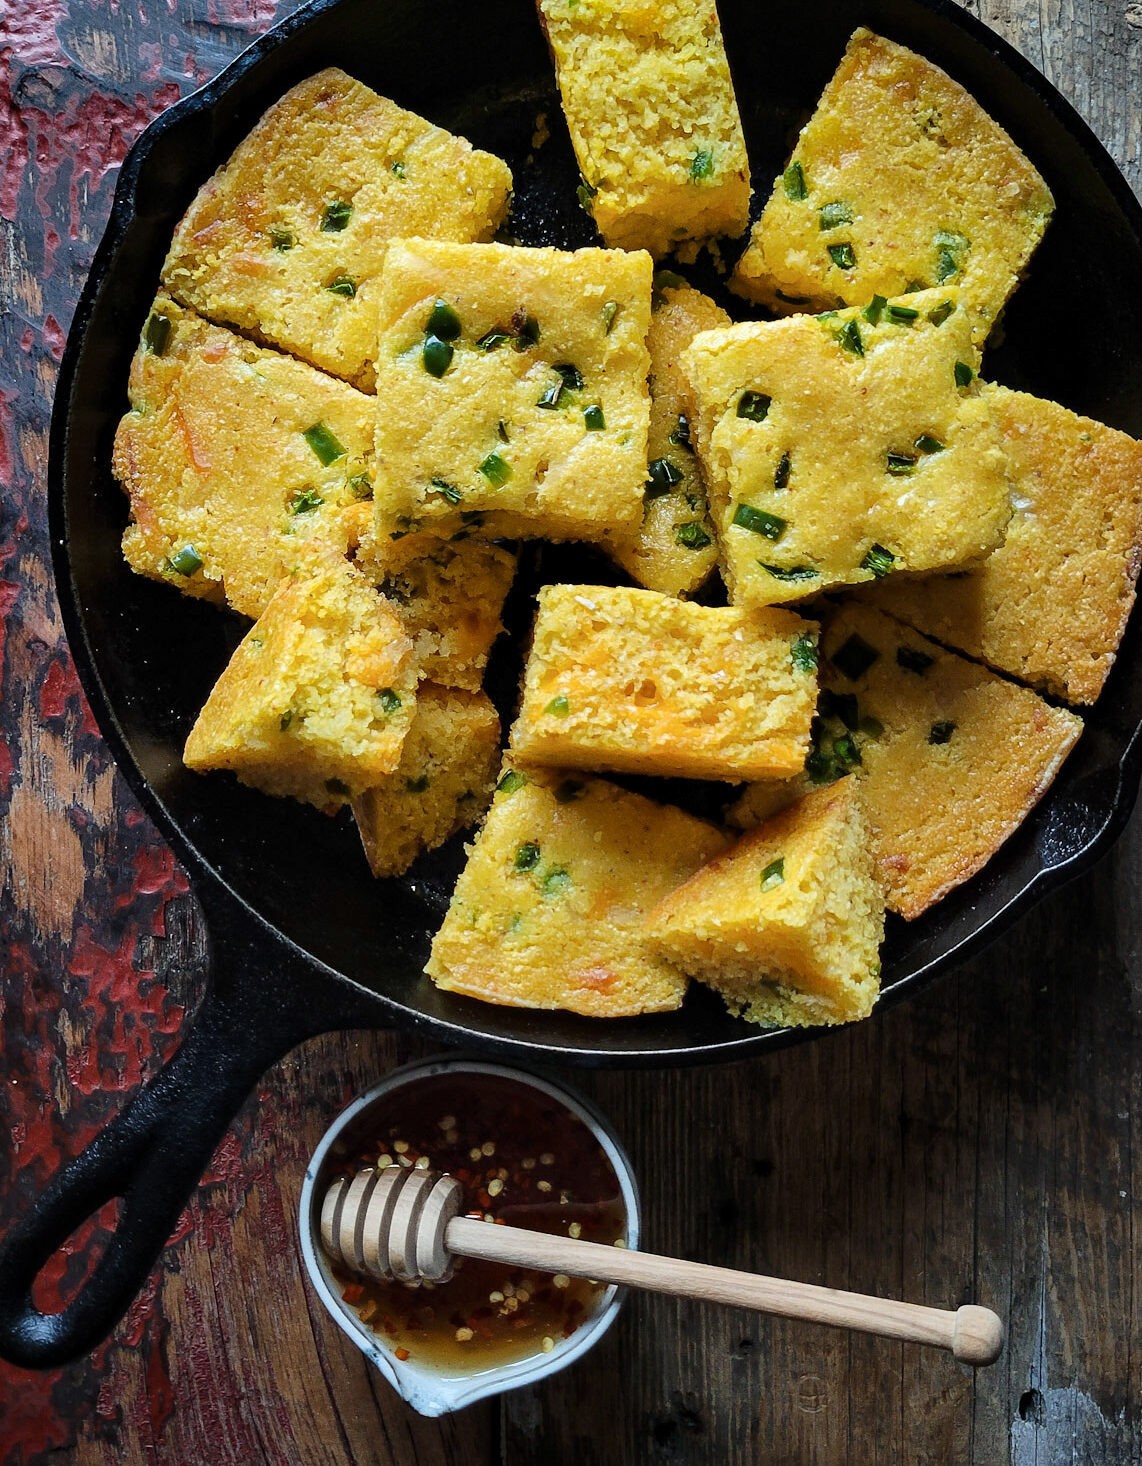 Jalapeno Cheddar Cornbread sliced up and sitting in an iron skillet with a jar of hot honey on the side.